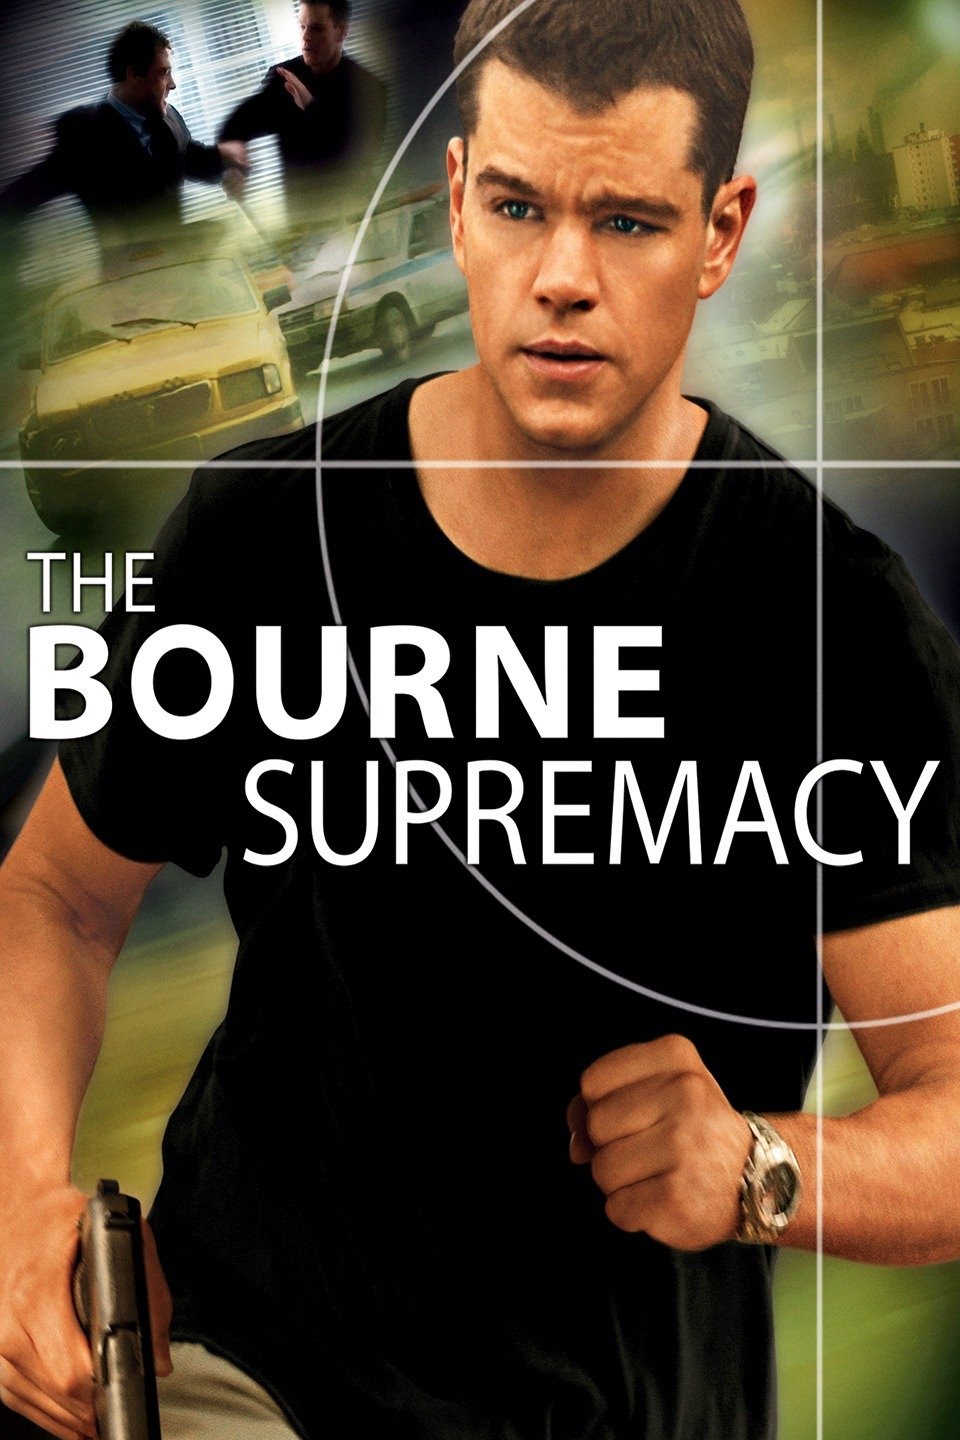 The Bourne Supremacy (2004) Vudu or Movies Anywhere HD redemption only